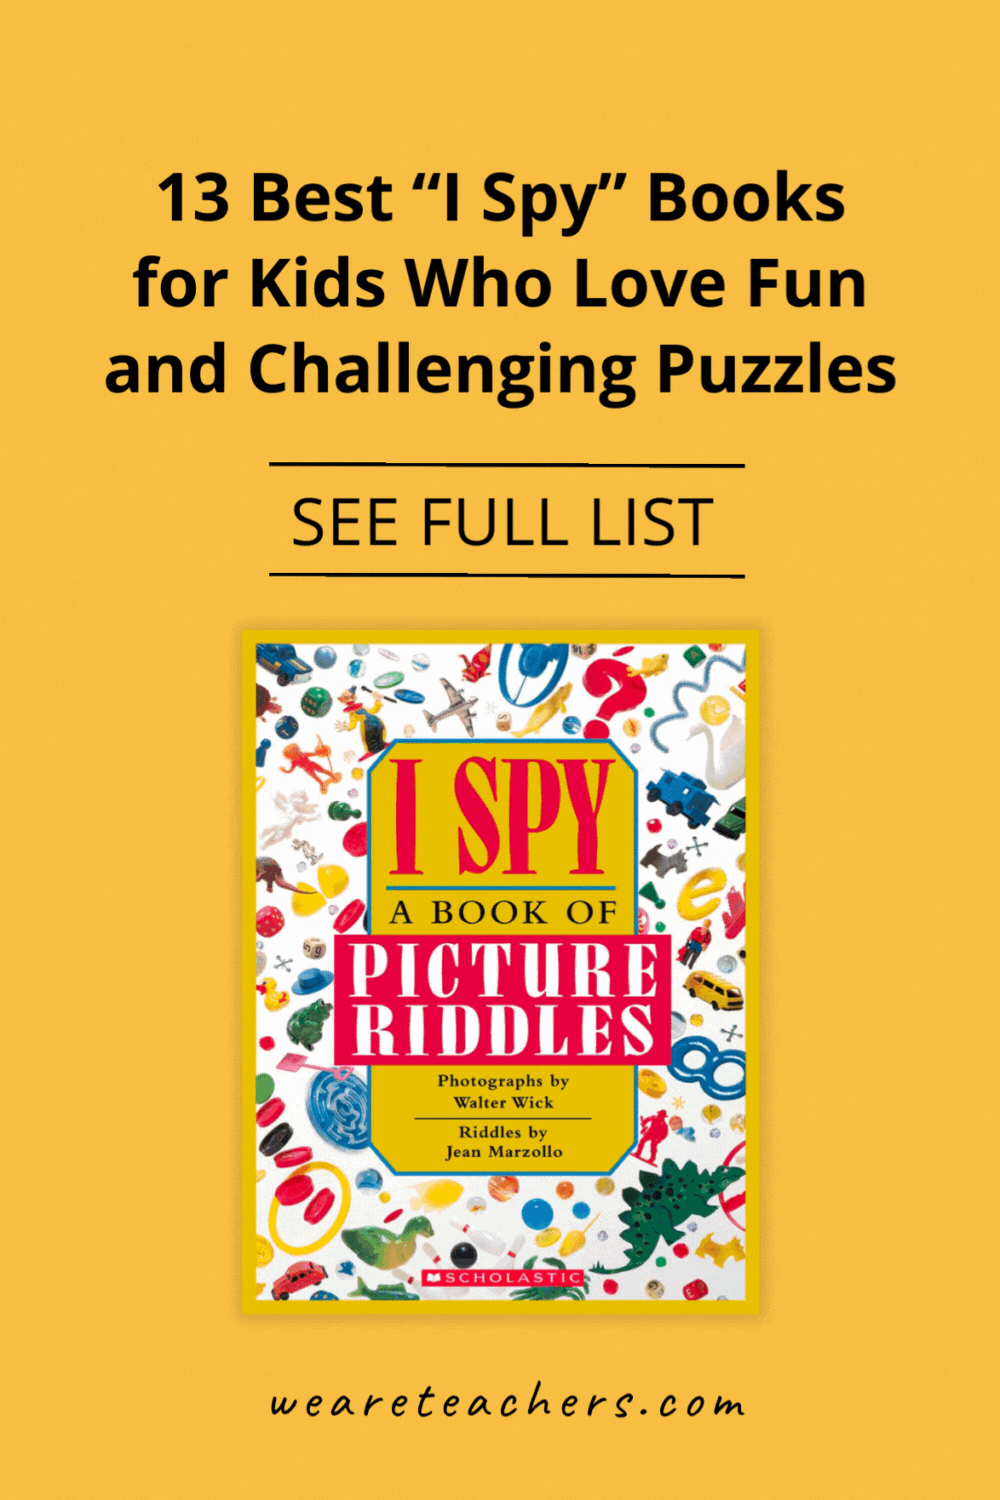 Start searching with some of our favorite picks of the best I Spy books, sure to deliver tons of nostalgia!